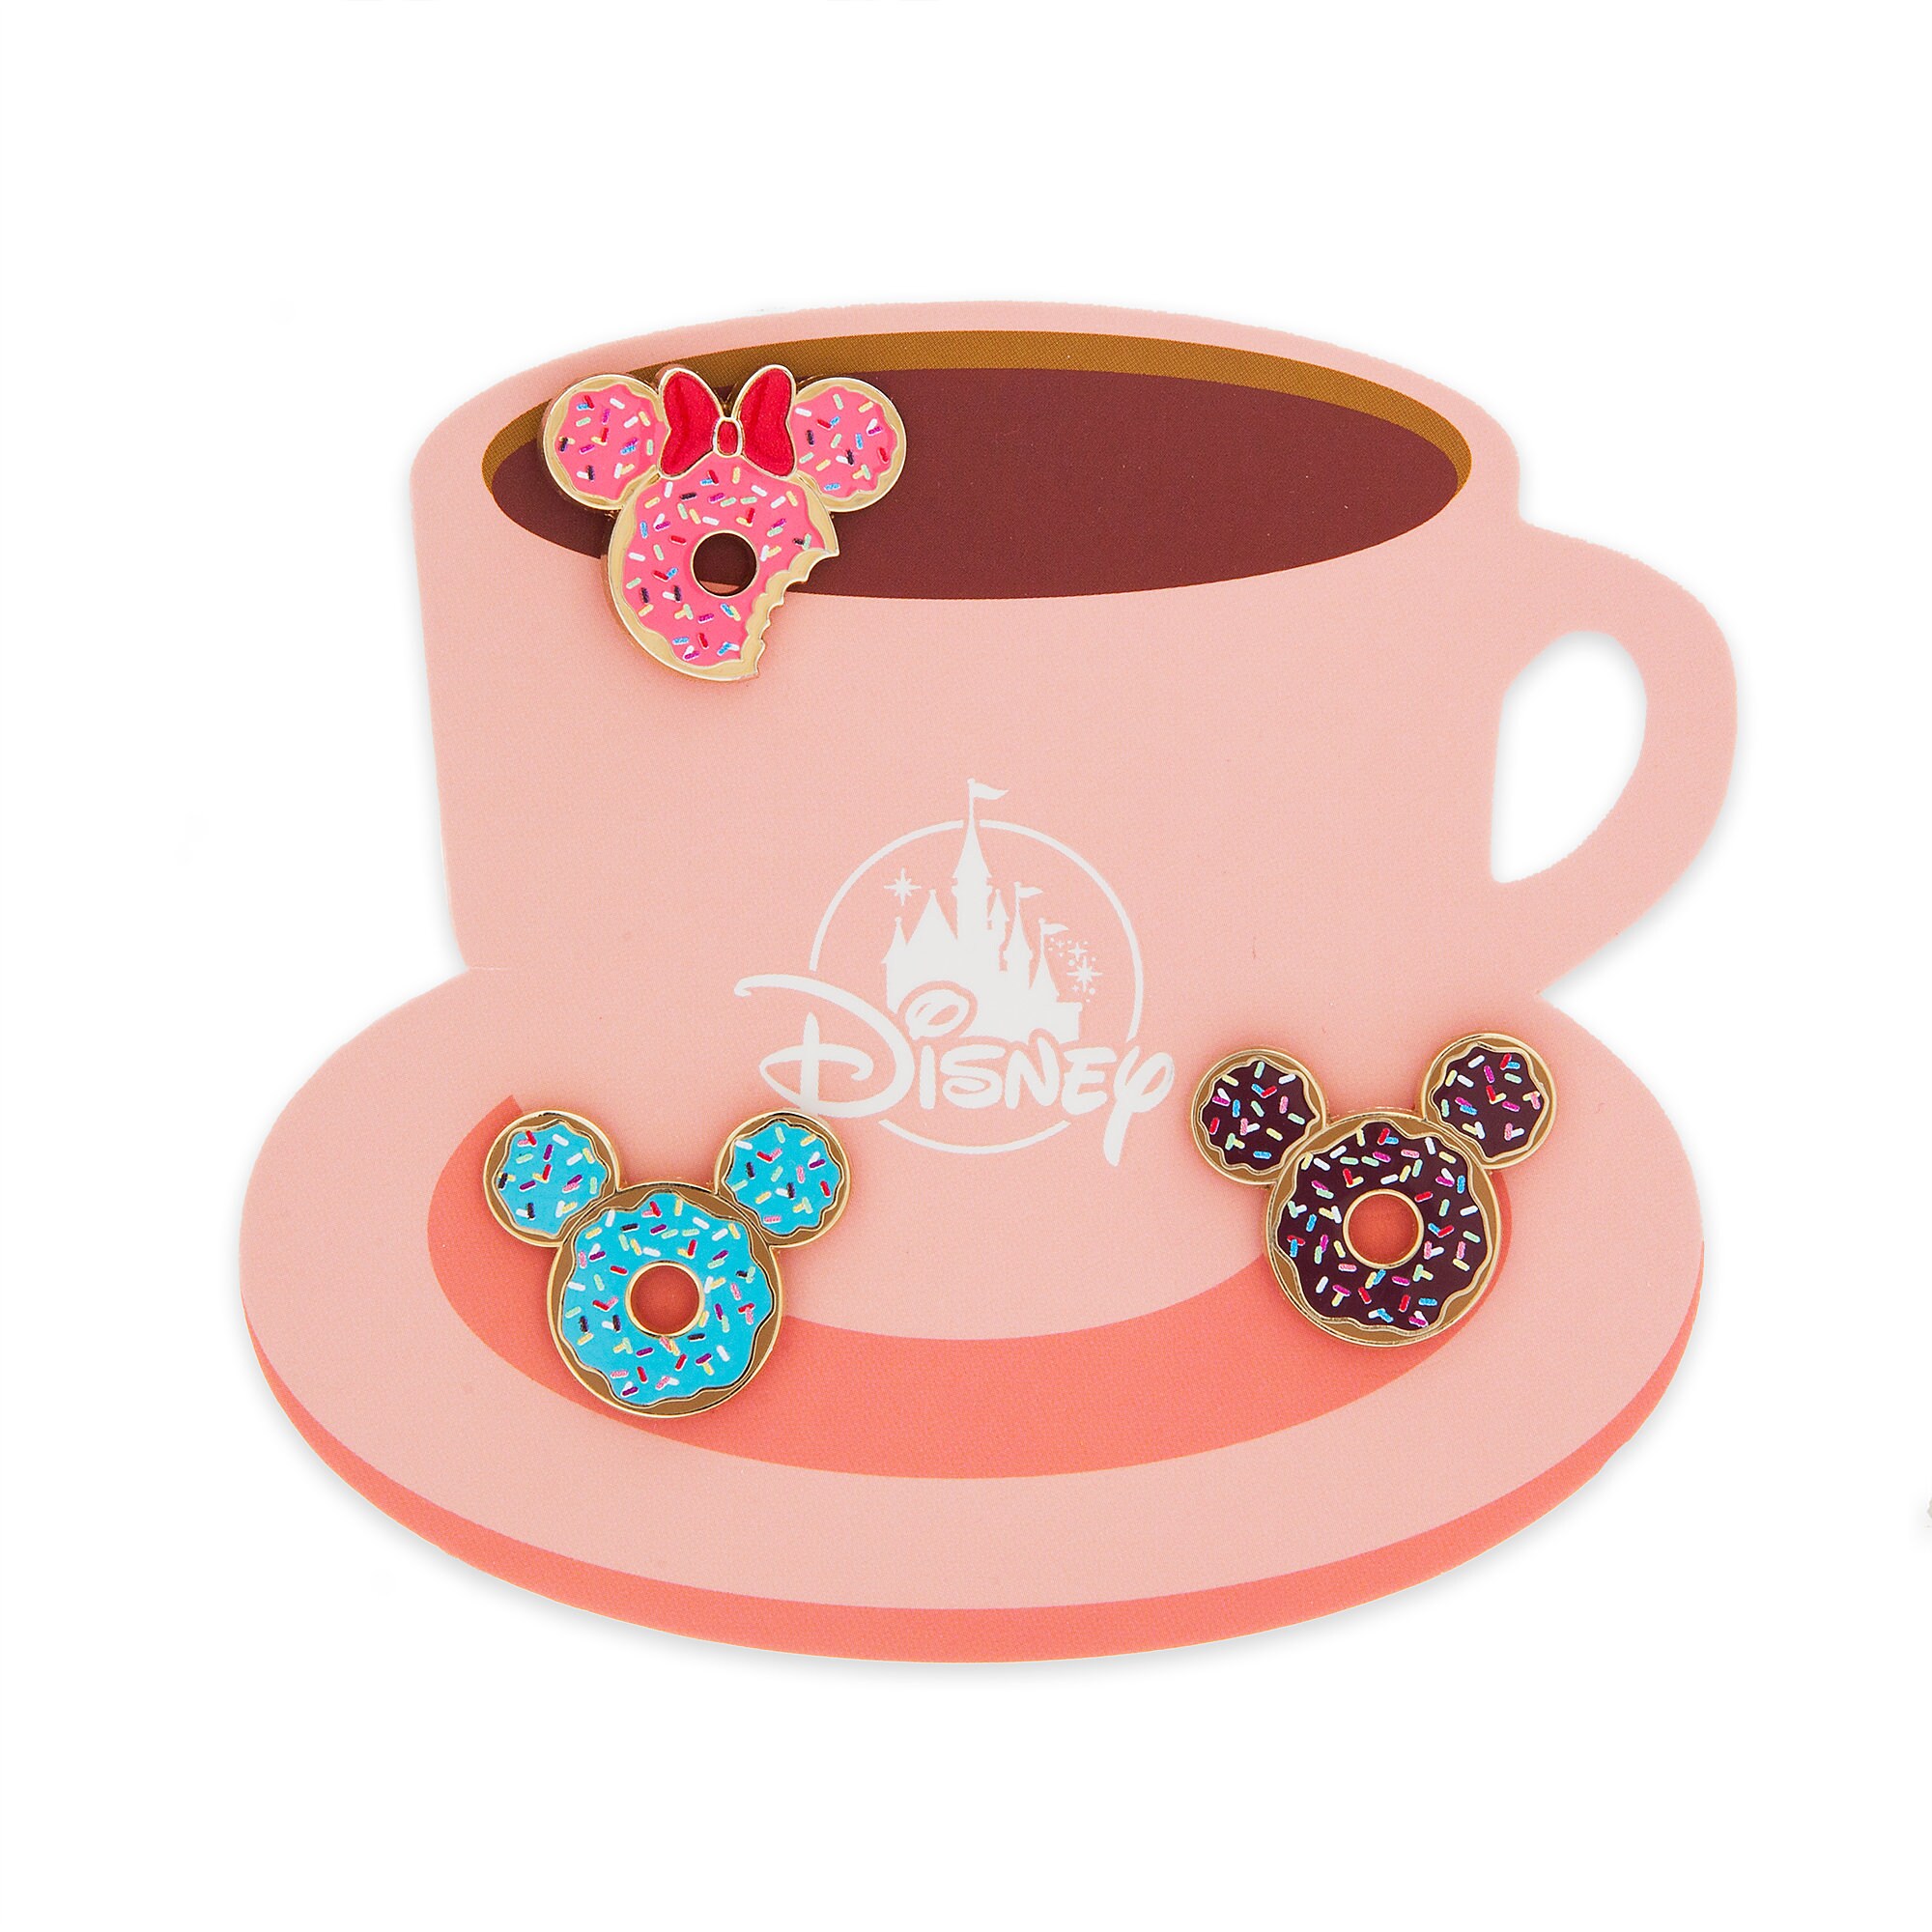 Mickey and Minnie Mouse Donut Pin Set